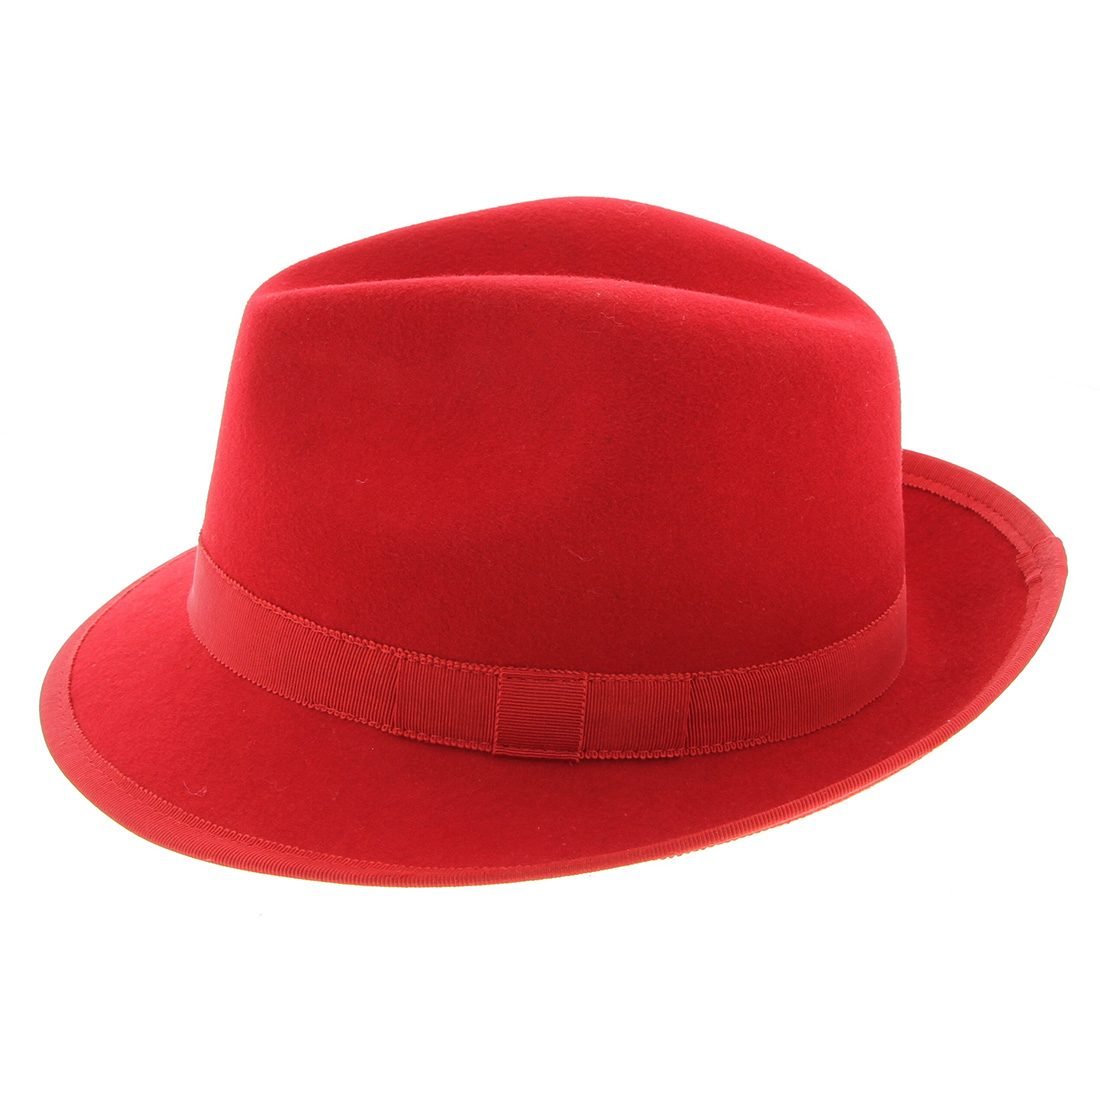 Melbourne Hats Trilby Formal - Red/Red Band